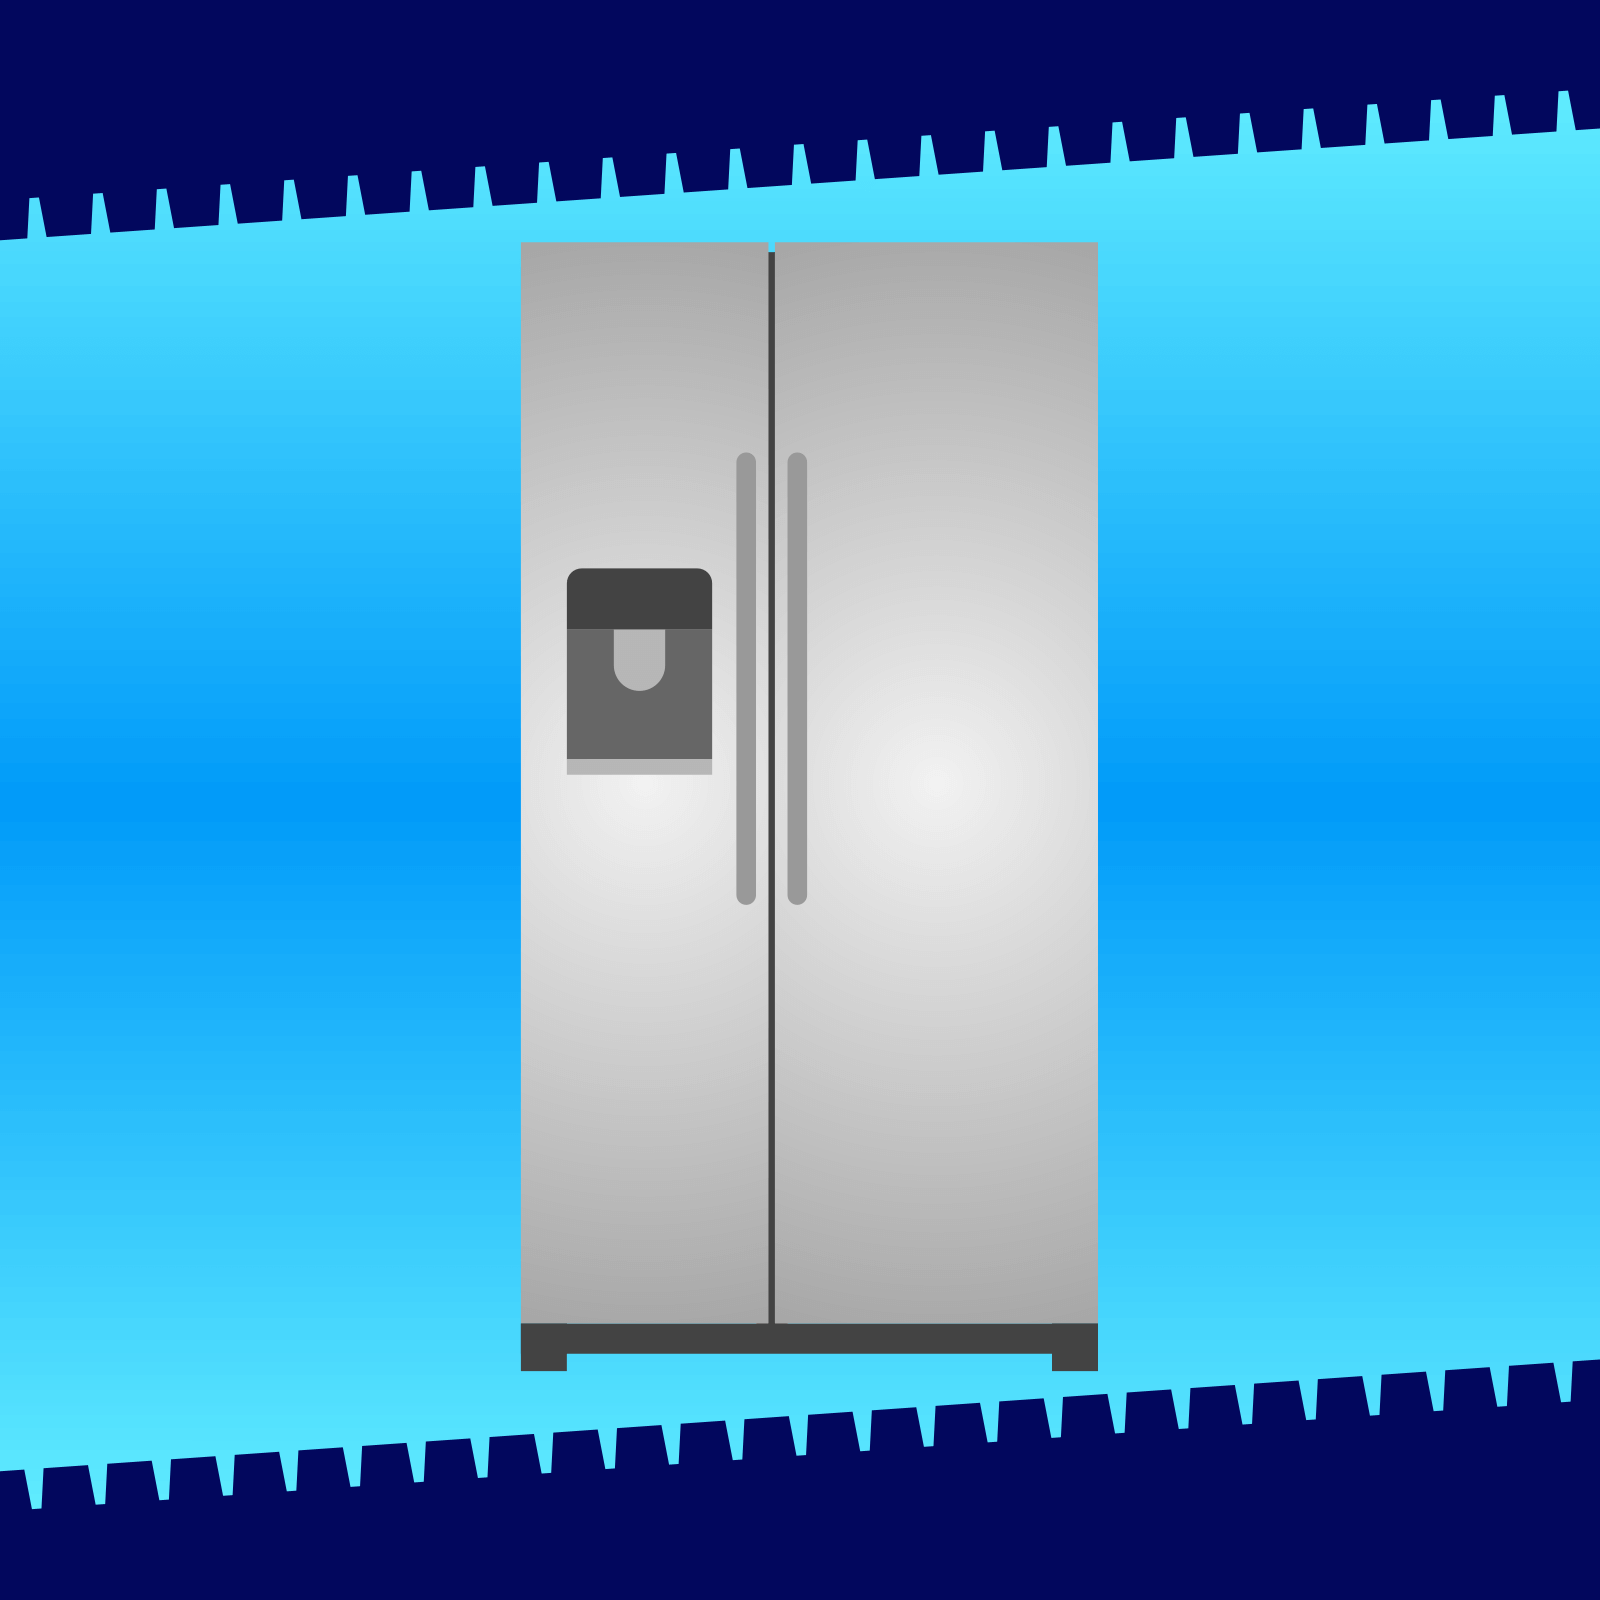 Drawing of a stainless steel refrigerator with water and ice dispenser